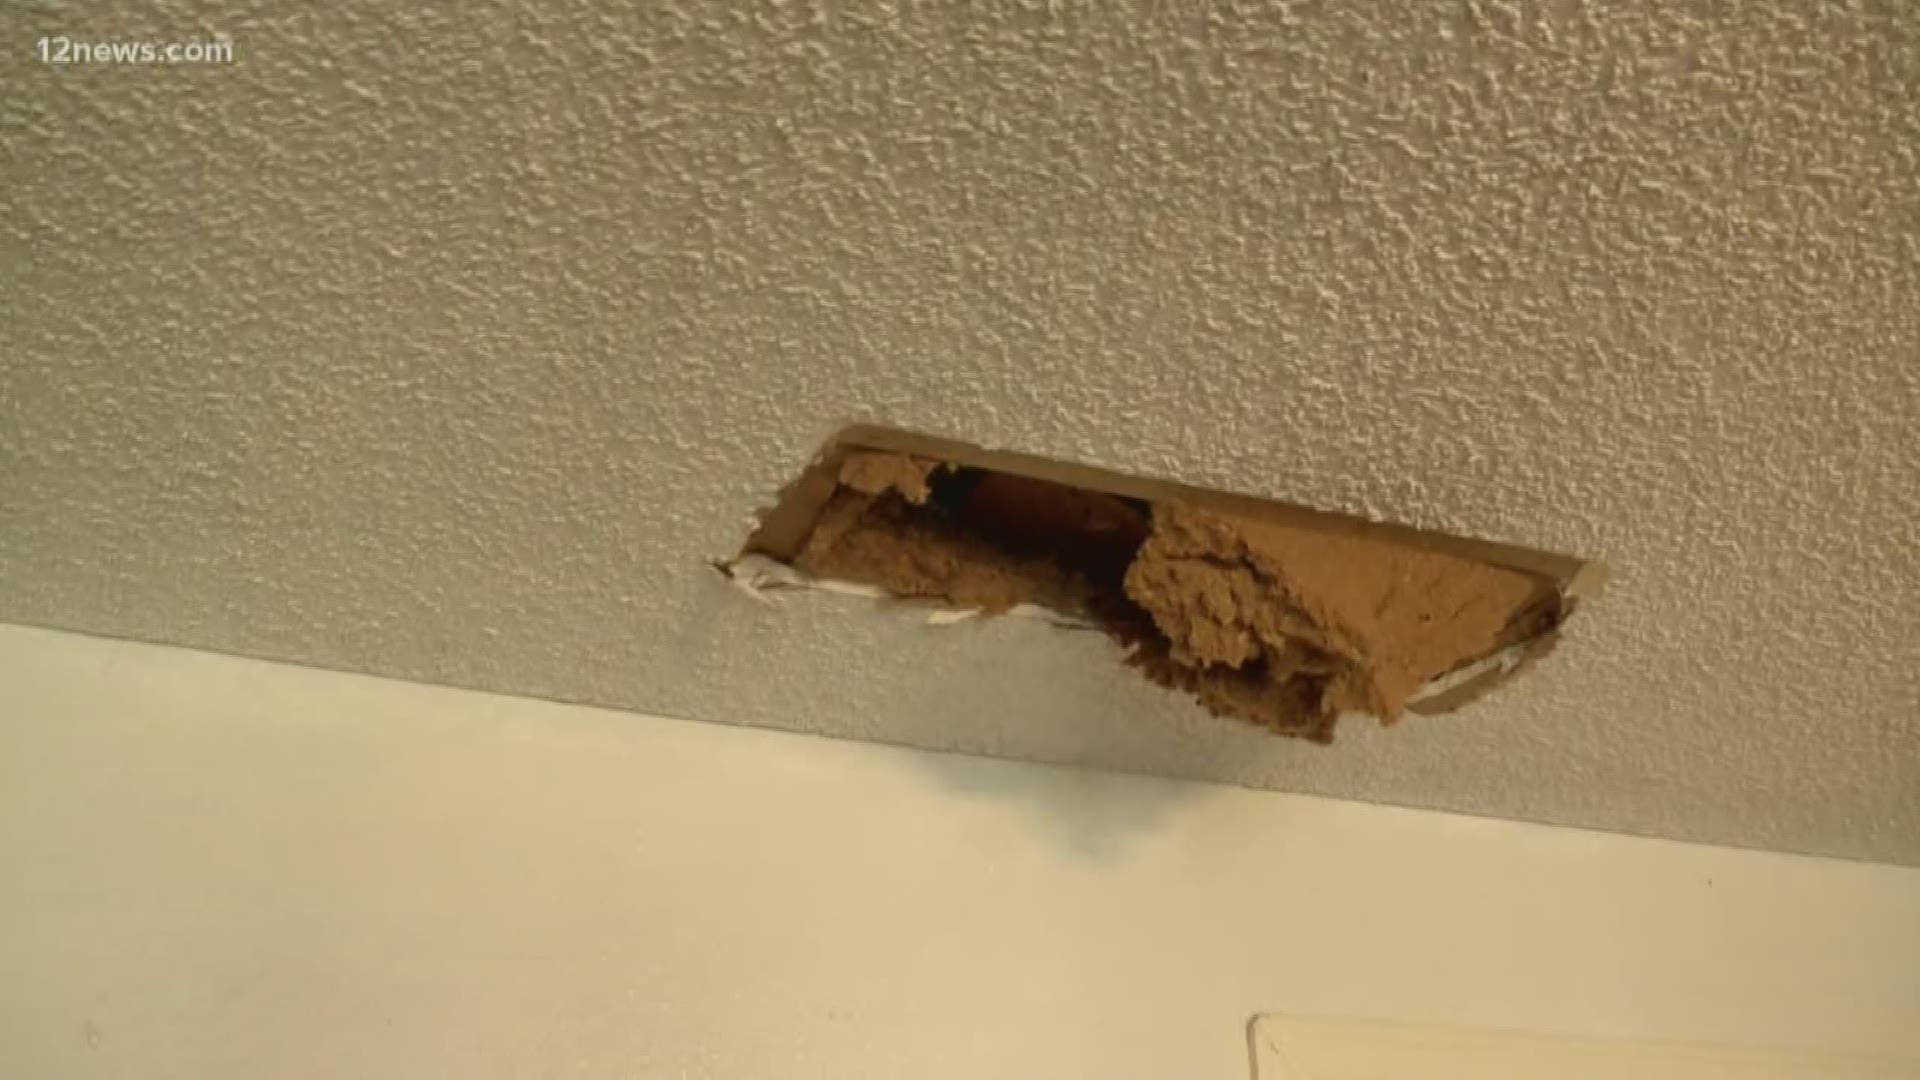 A Phoenix homeowner is thankful his family is safe after a suspected burglar got stuck in his ceiling.